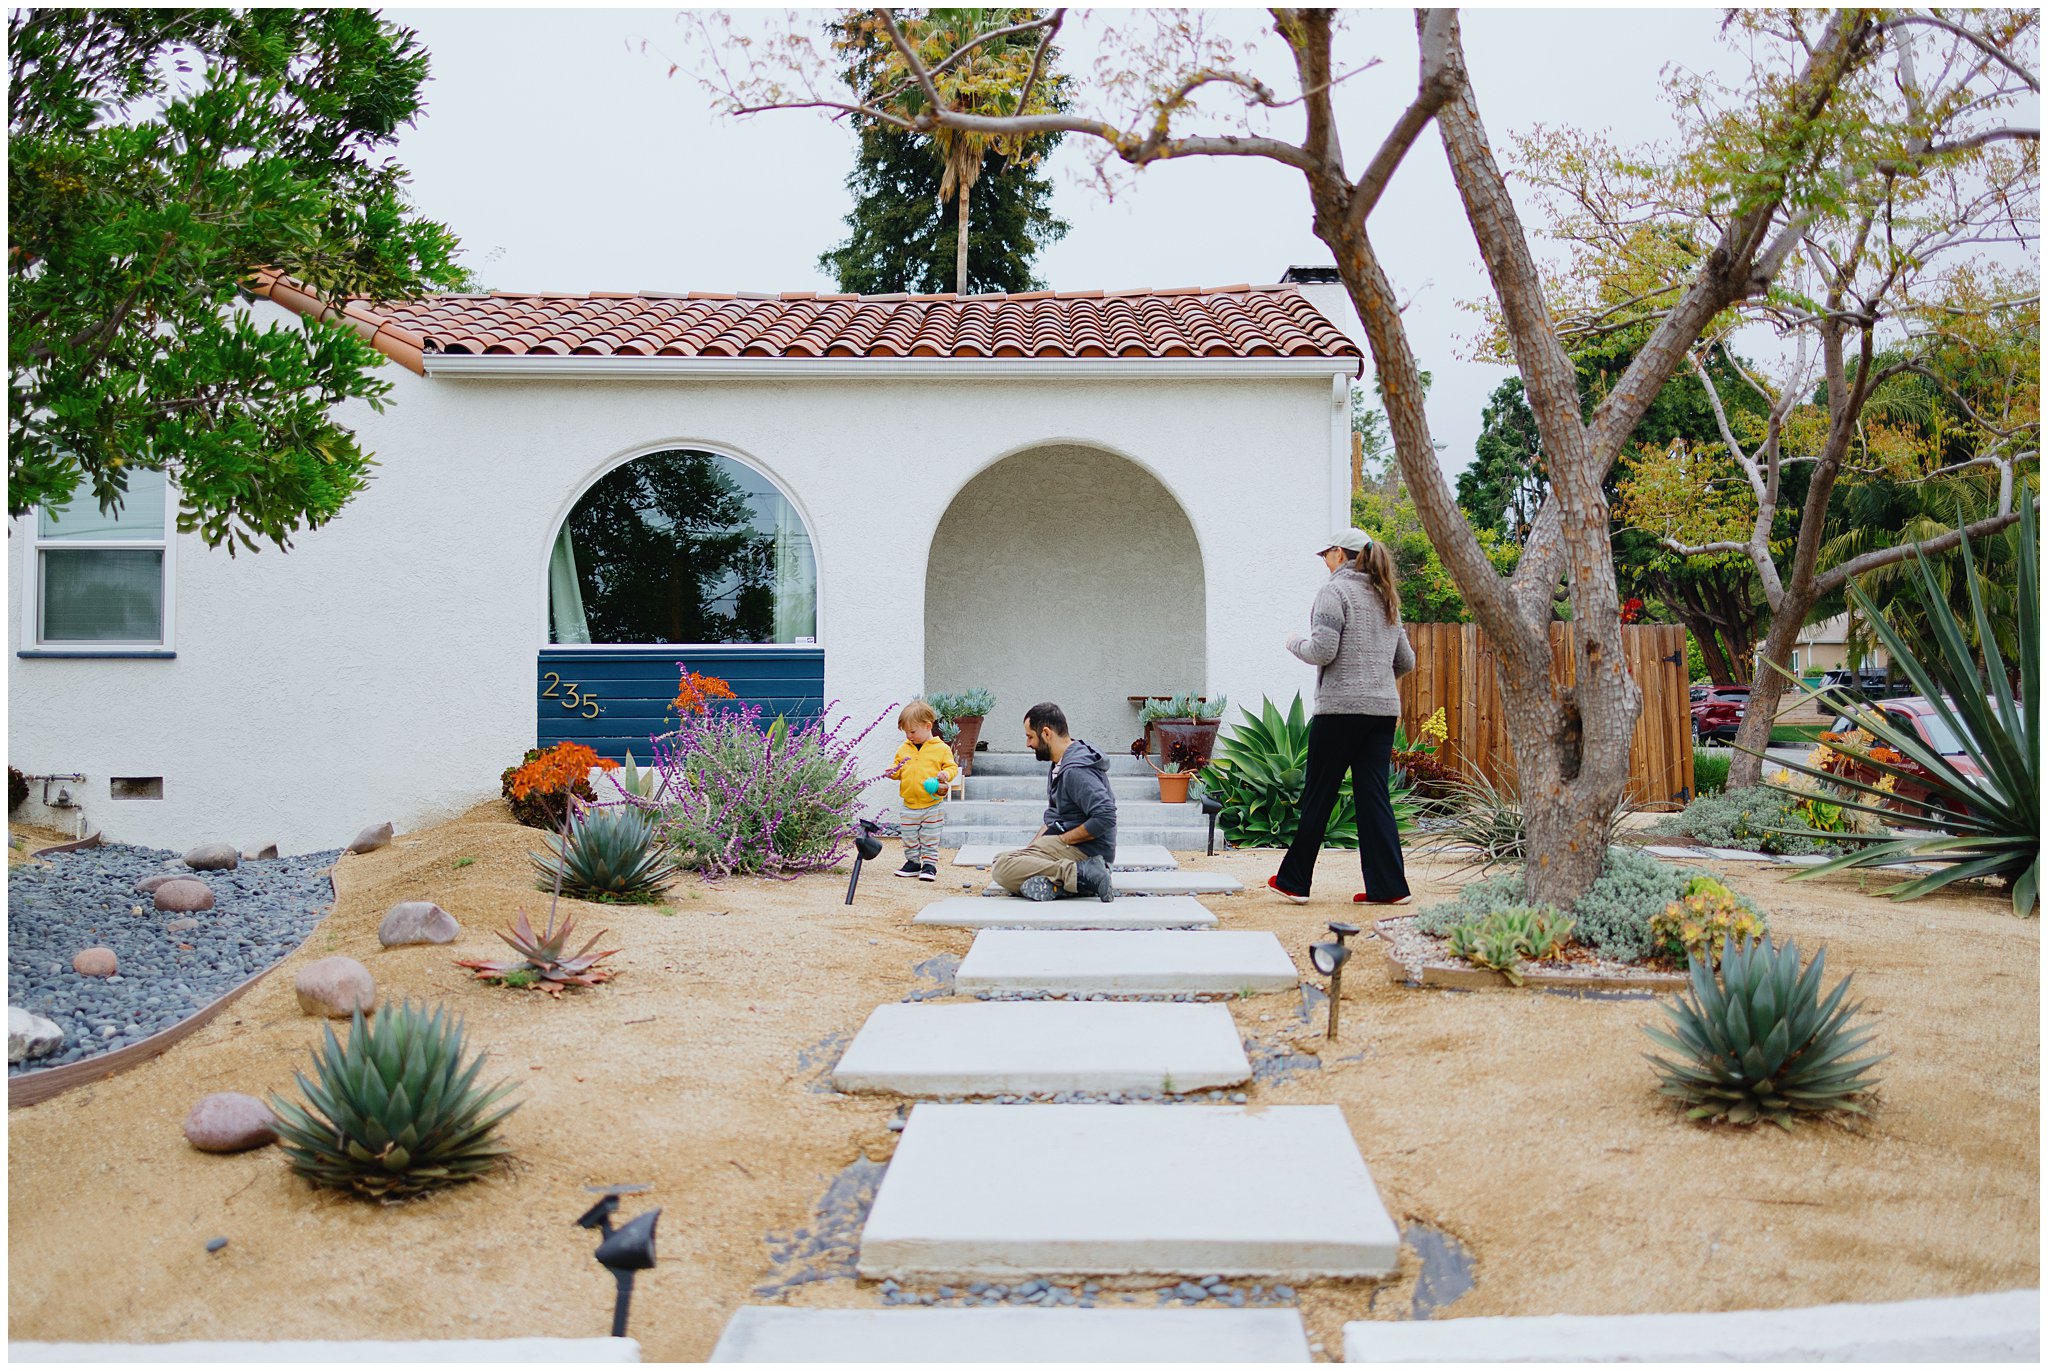 Wide shot of the outside of a house showing adoptive parents playing with their child.